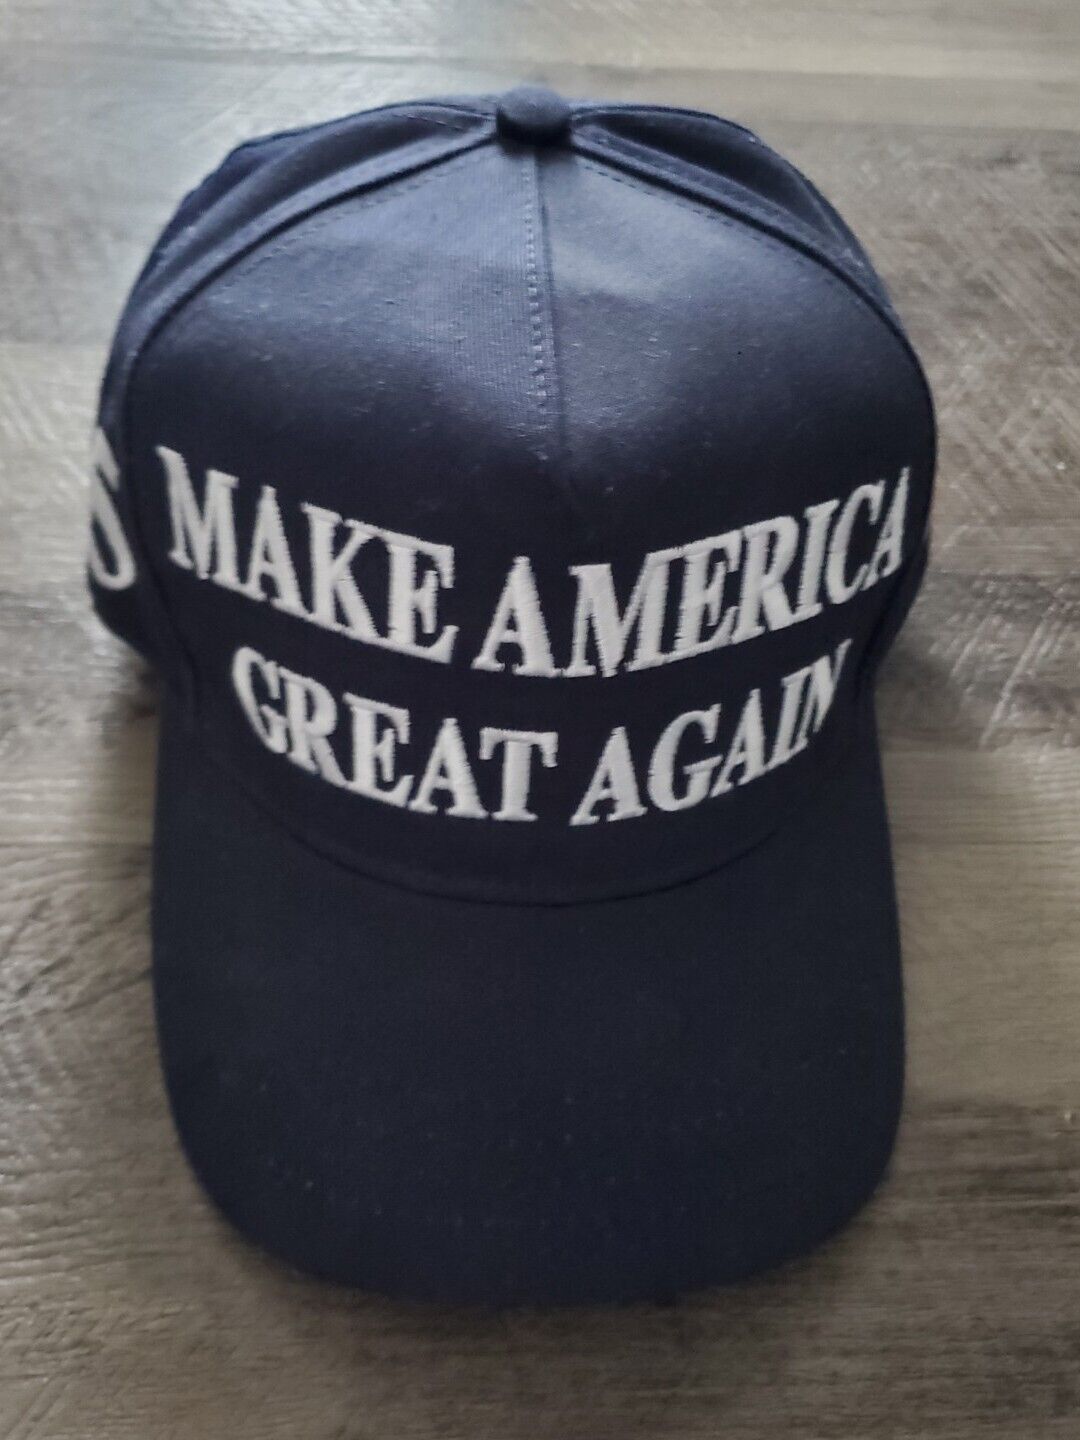 DONALD TRUMP OFFICIAL MAKE AMERICA GREAT AGAIN HAT  - AUTHENTIC NAVY & WHITE  